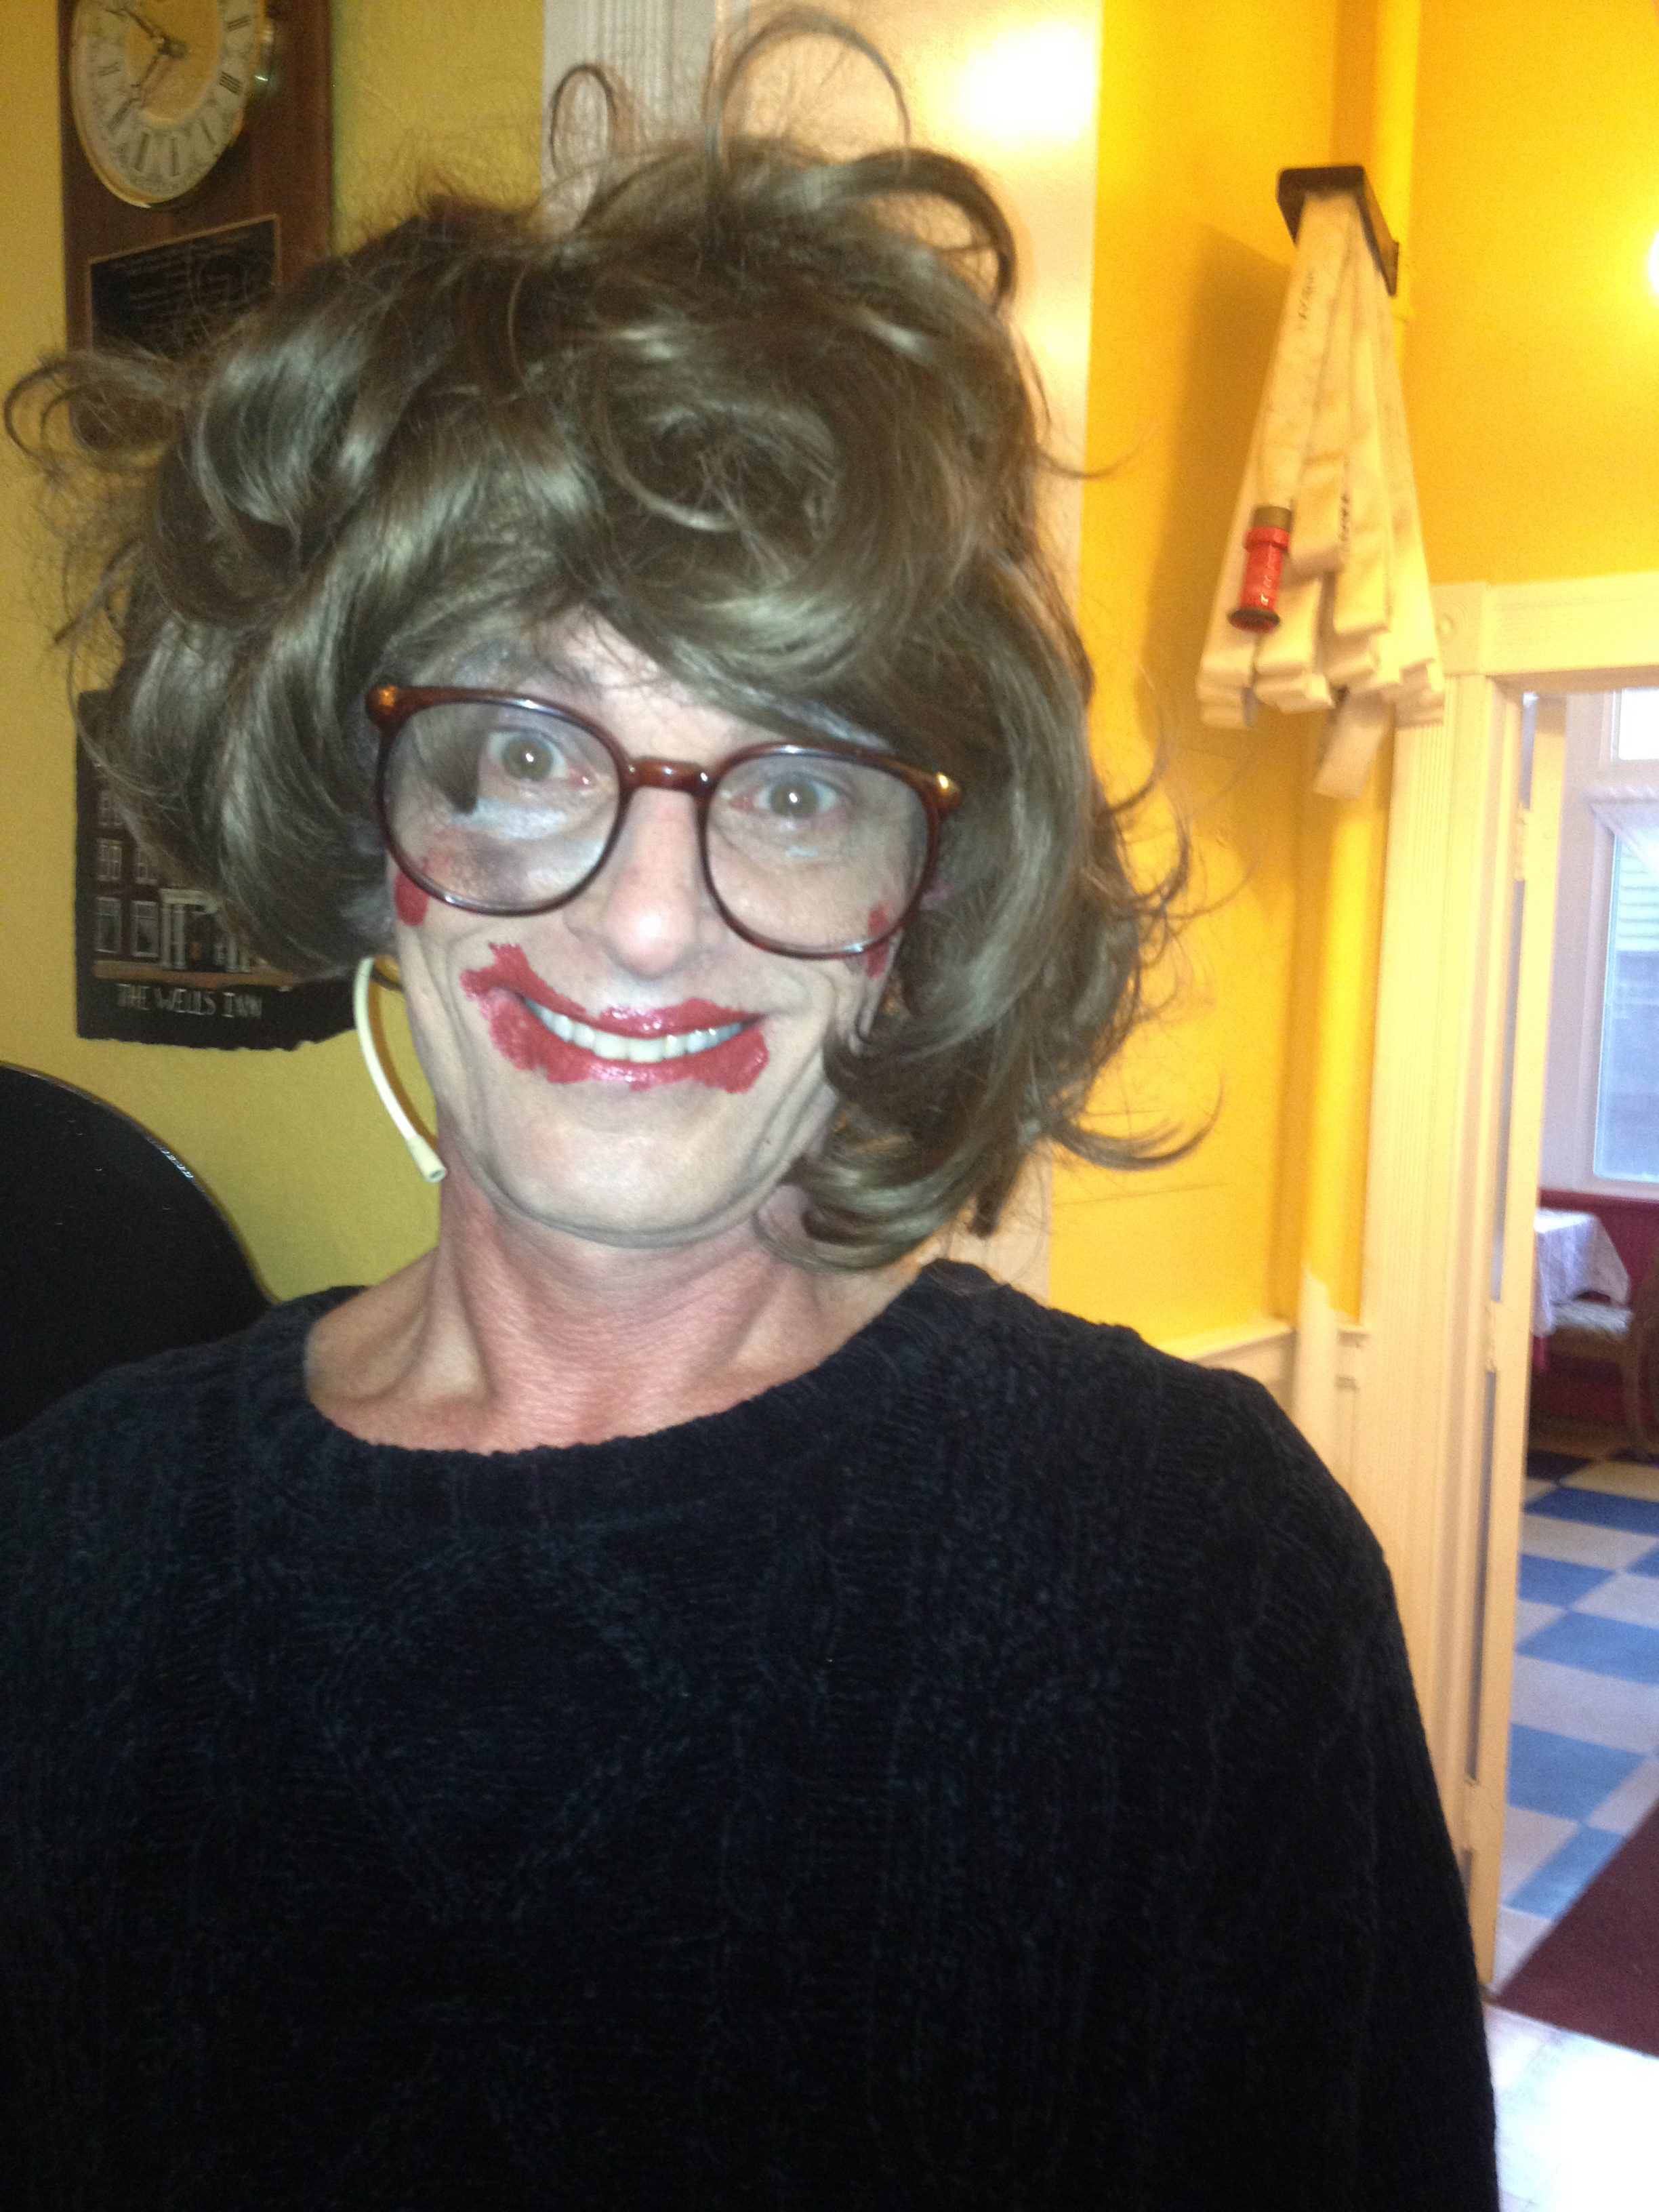 Butch Maxwell as Olive Boyle after Tank and Coach do her make-up